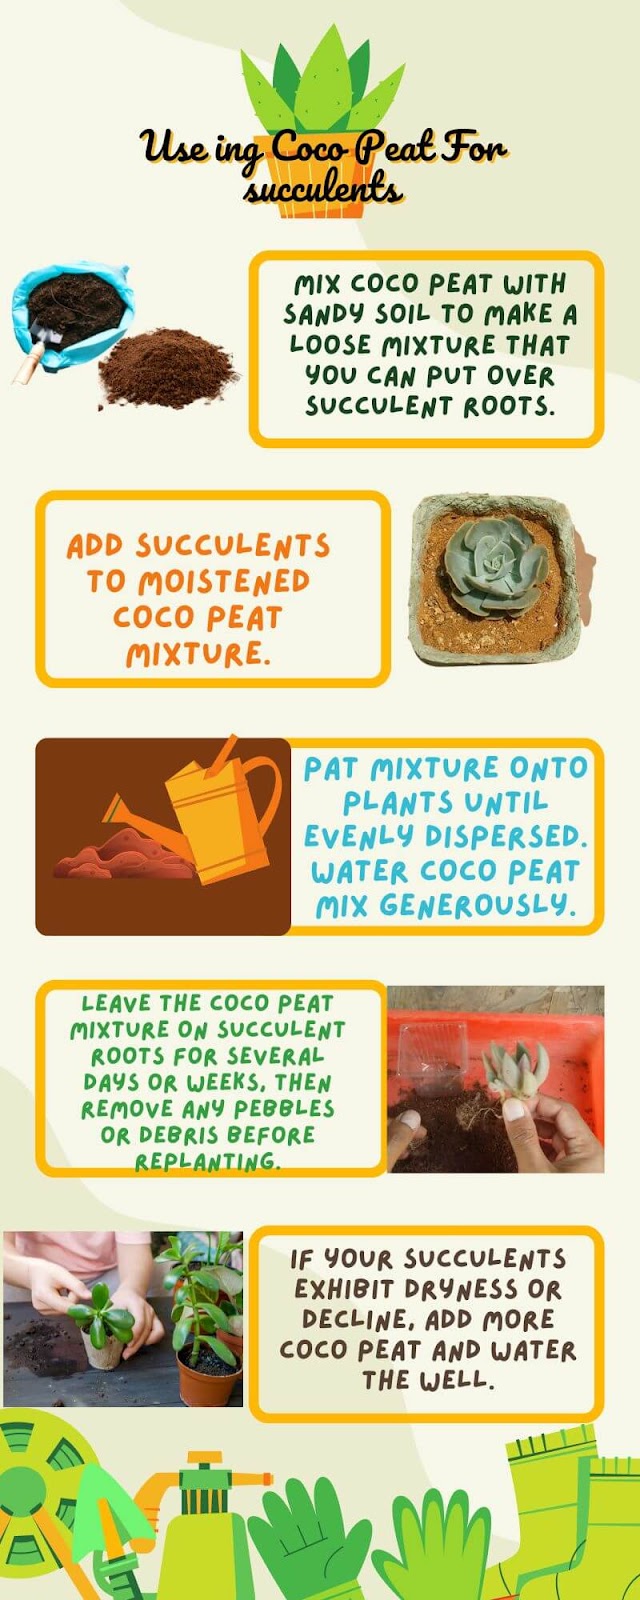 How To Use Coco Peat For succulents?